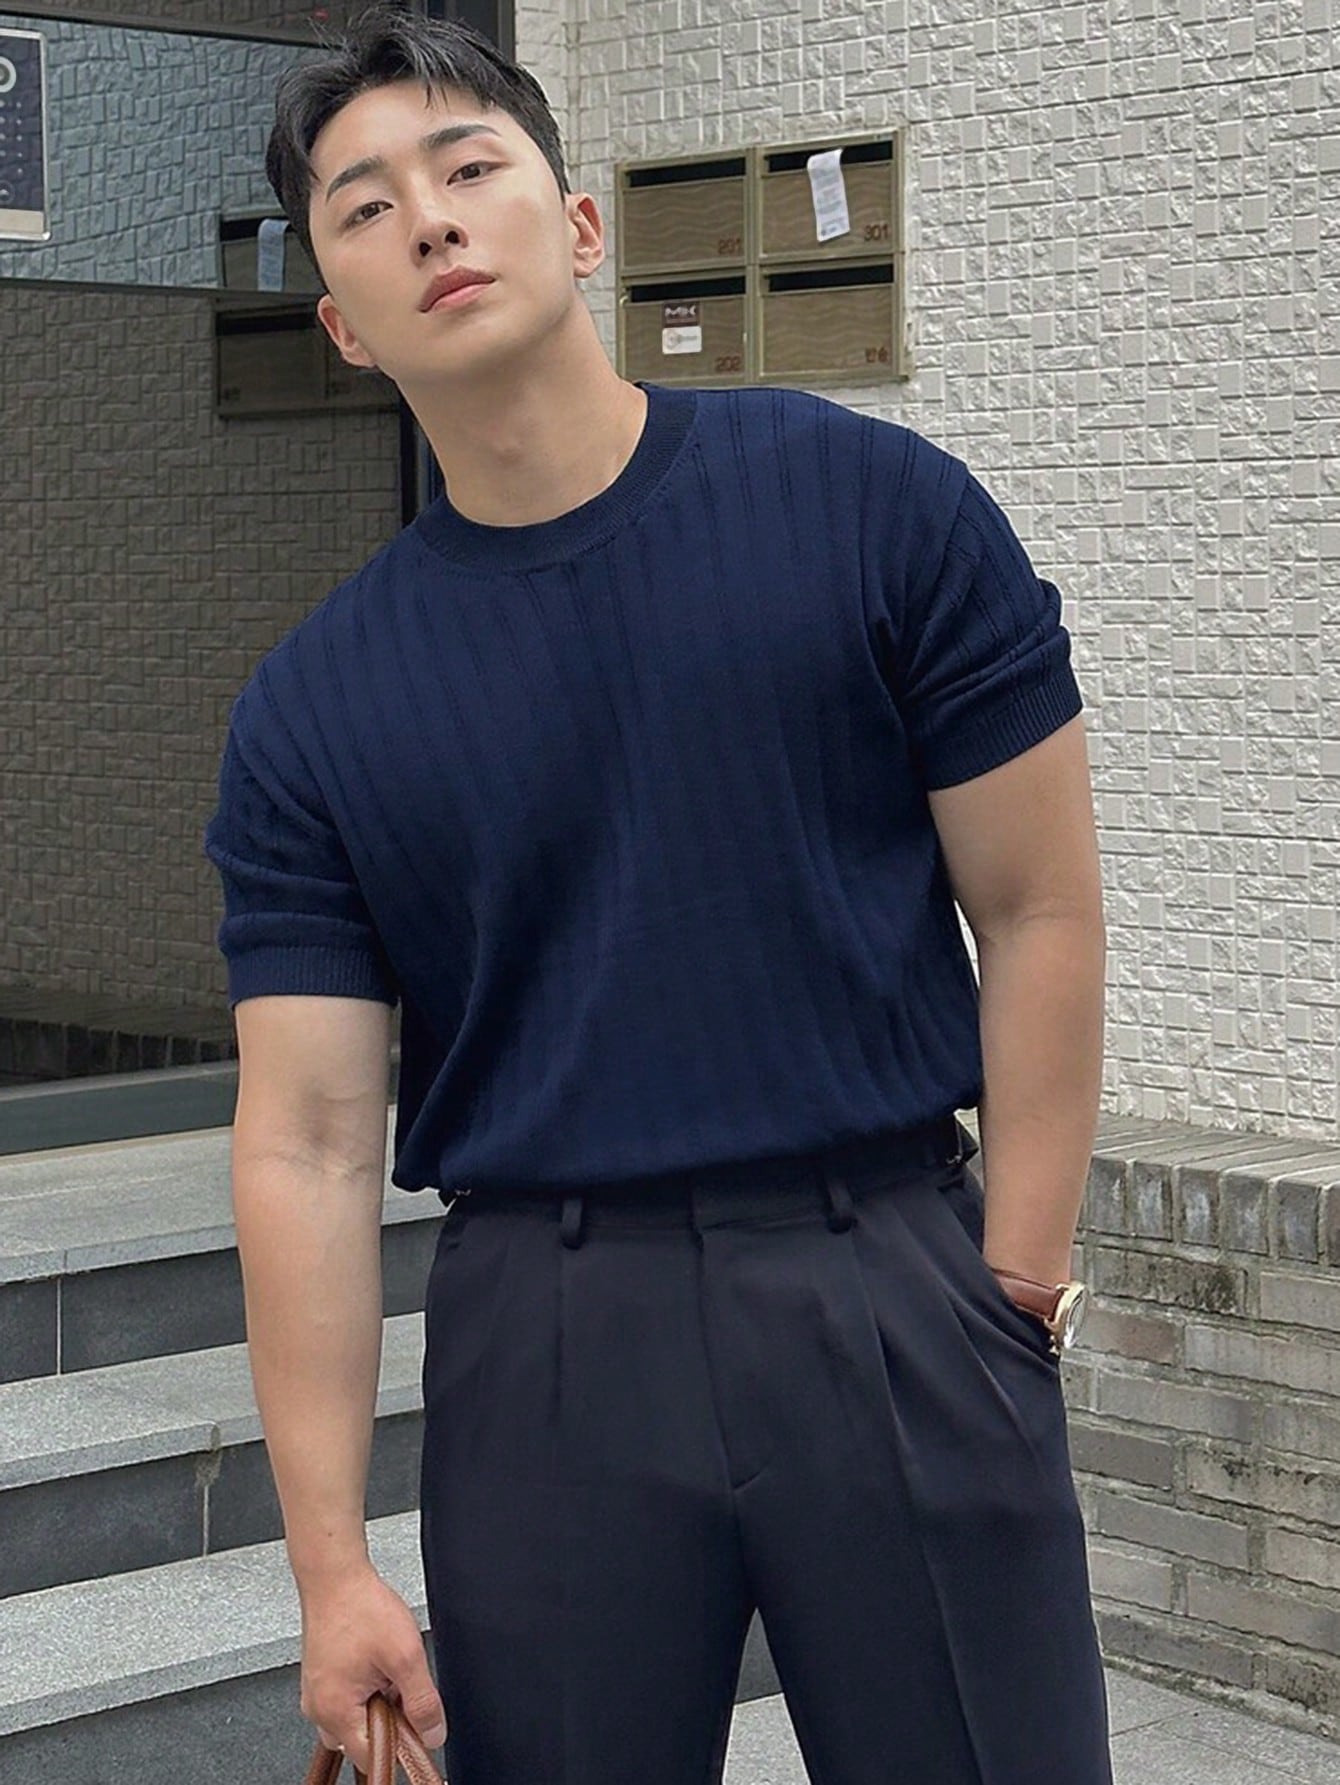 Men's Summer Solid Color Short Sleeve Knitted Top